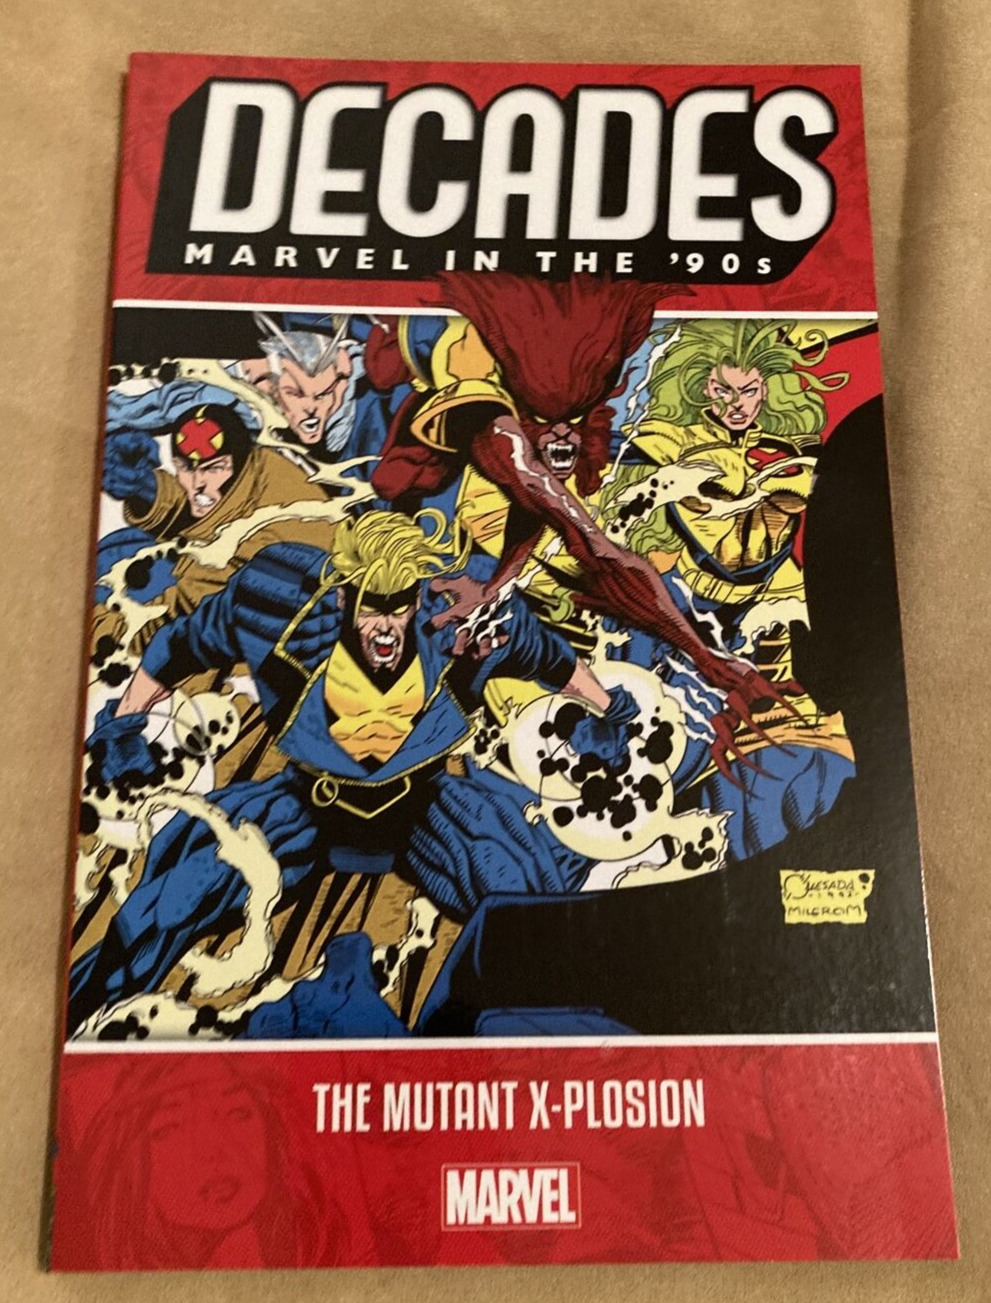 Decades Marvel in the '90s: The Mutant X-Plosion TPB #1-1ST 2019 Nice